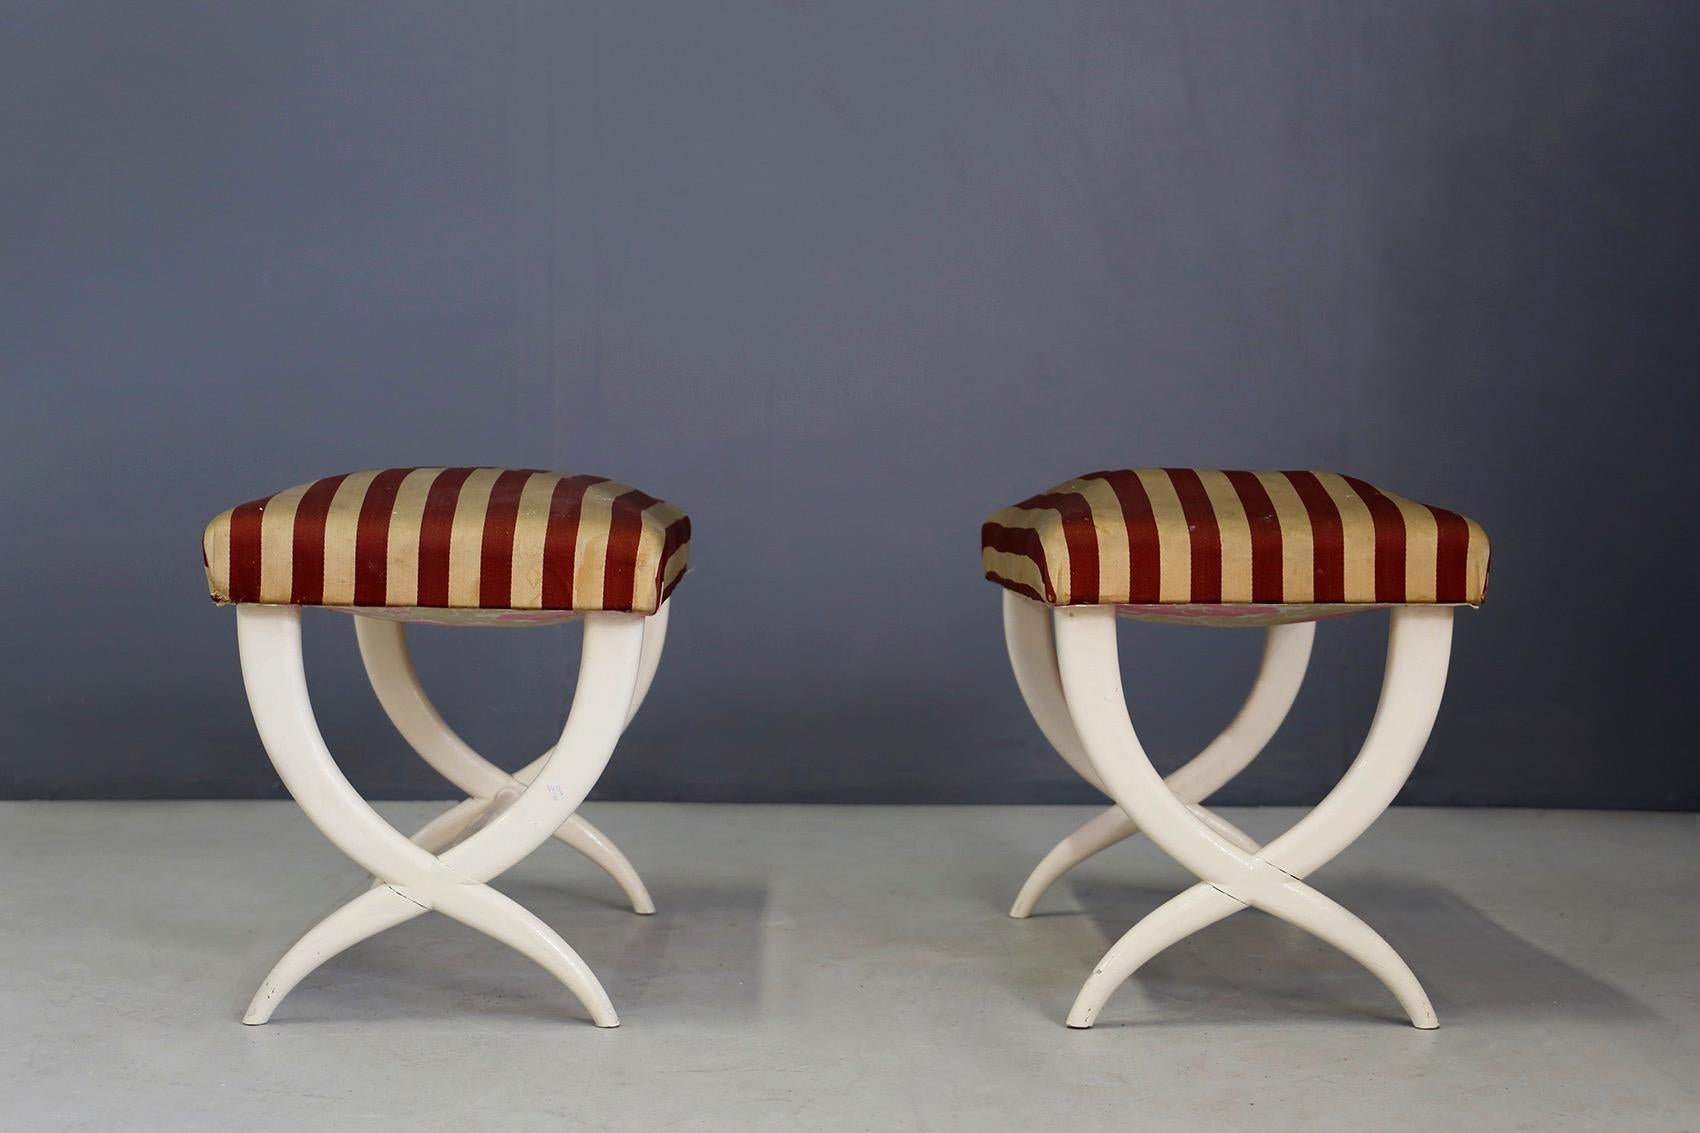 Fabric Pair of Bench Midcentury Gio Ponti and Tomaso Buzzi in Hardwood, 1930s-1940s